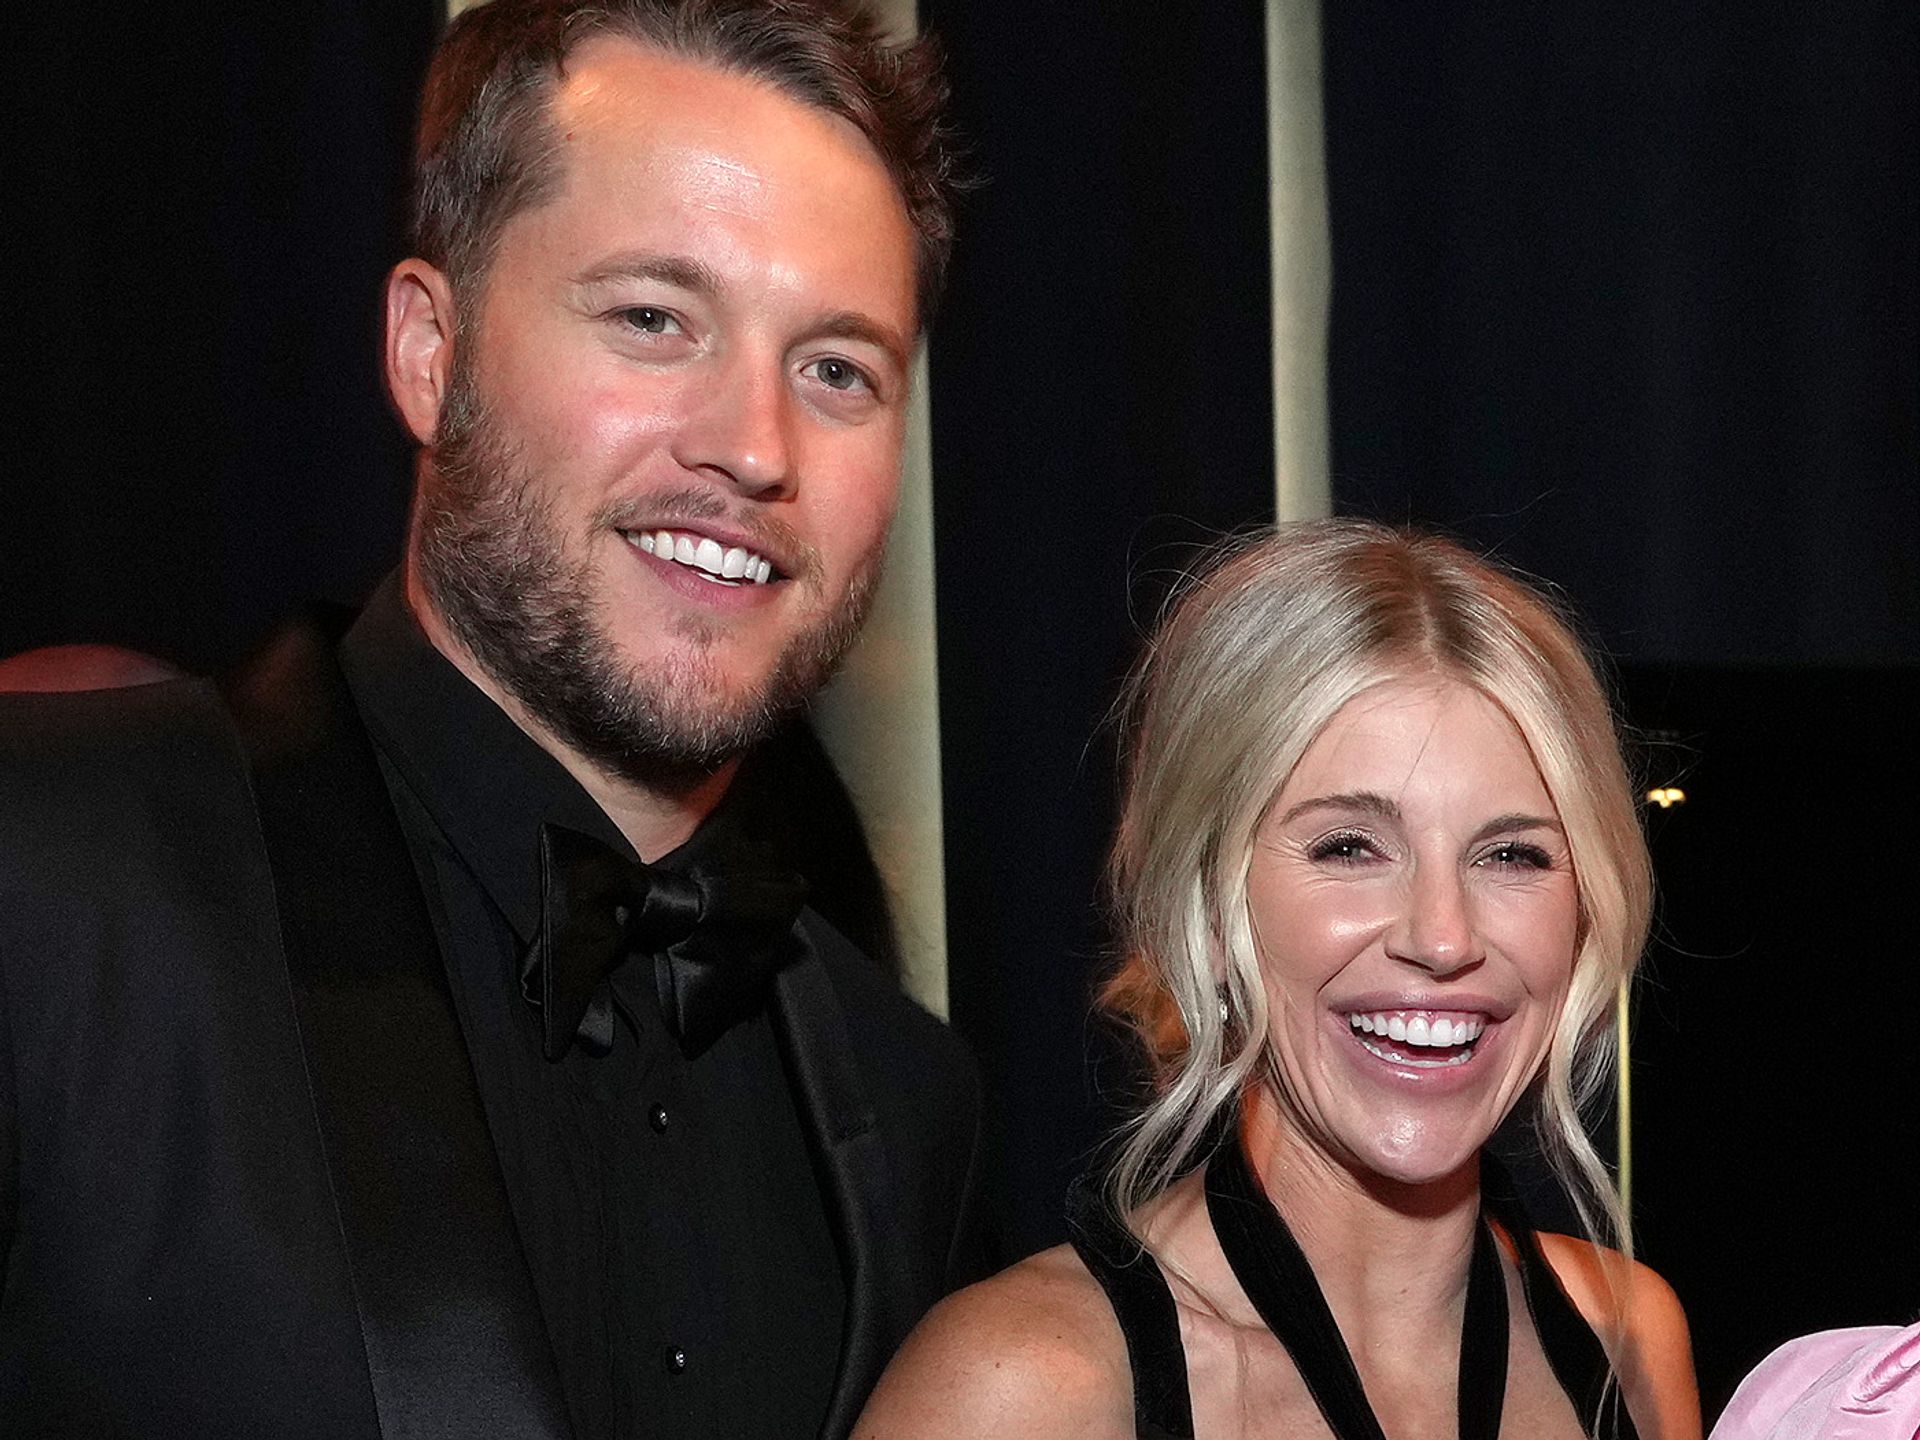 Kelly Stafford Says Matthew Stafford Struggling to Connect With